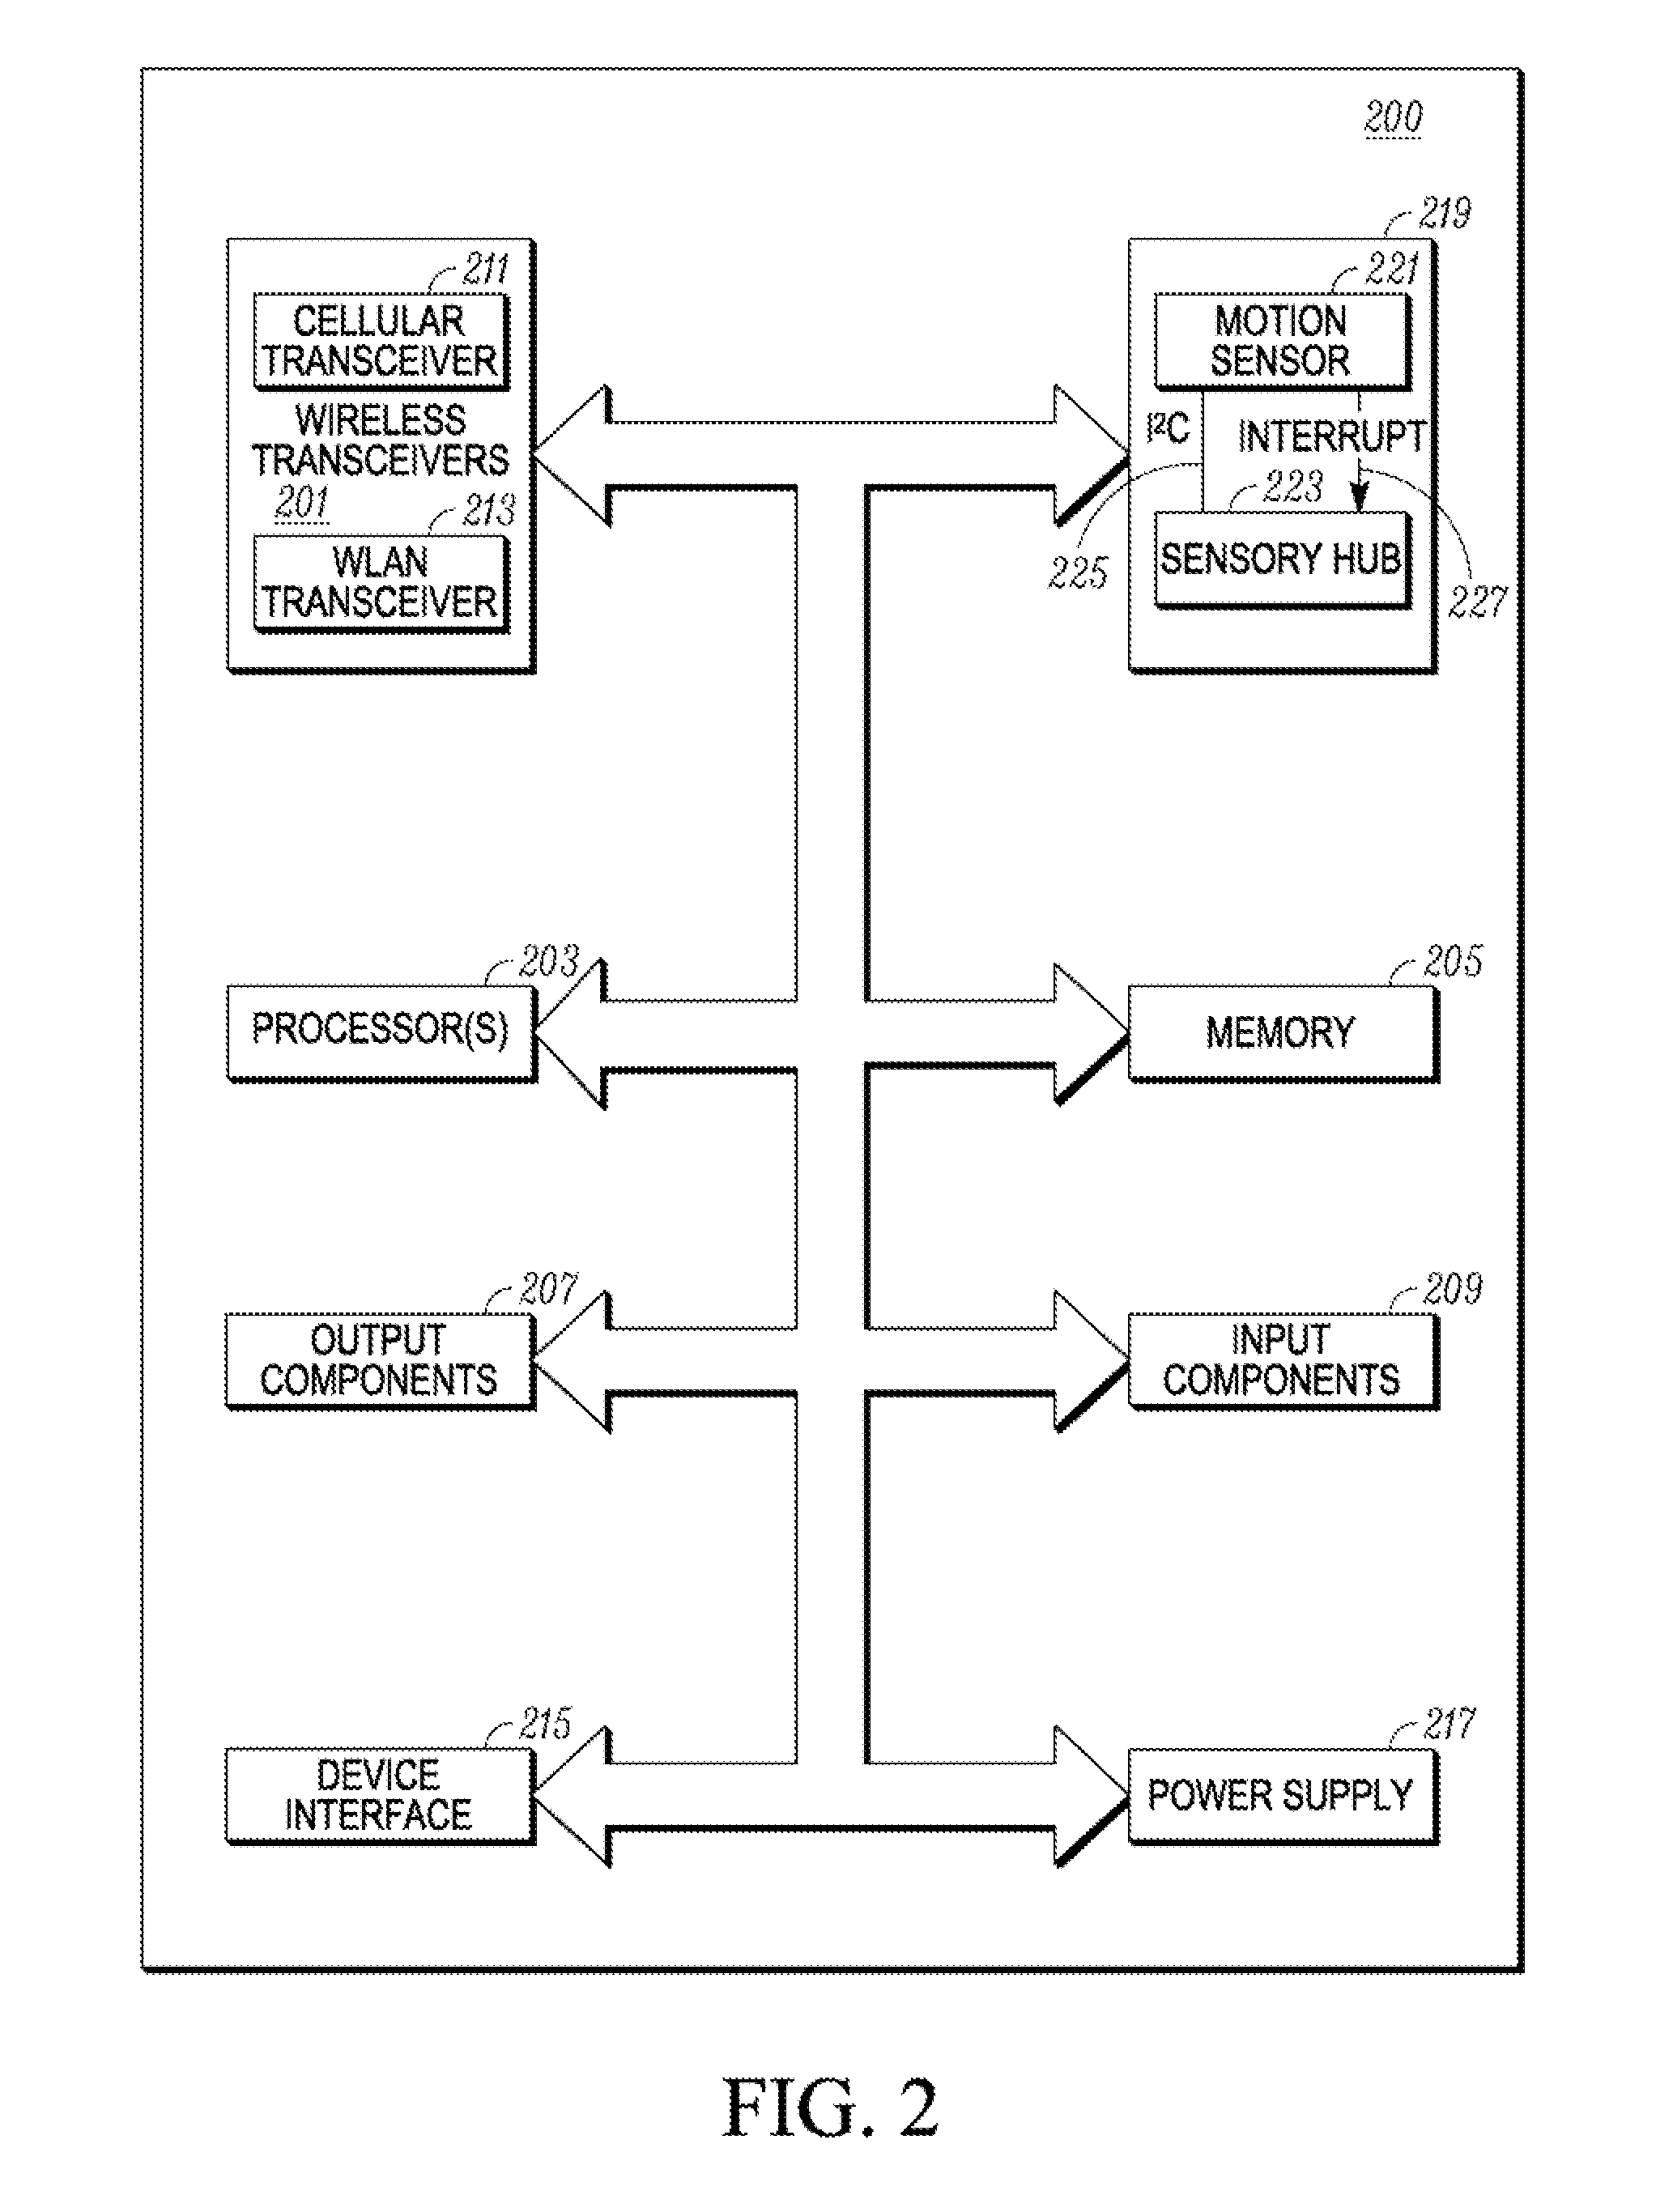 Method for Detecting False Wake Conditions of a Portable Electronic Device